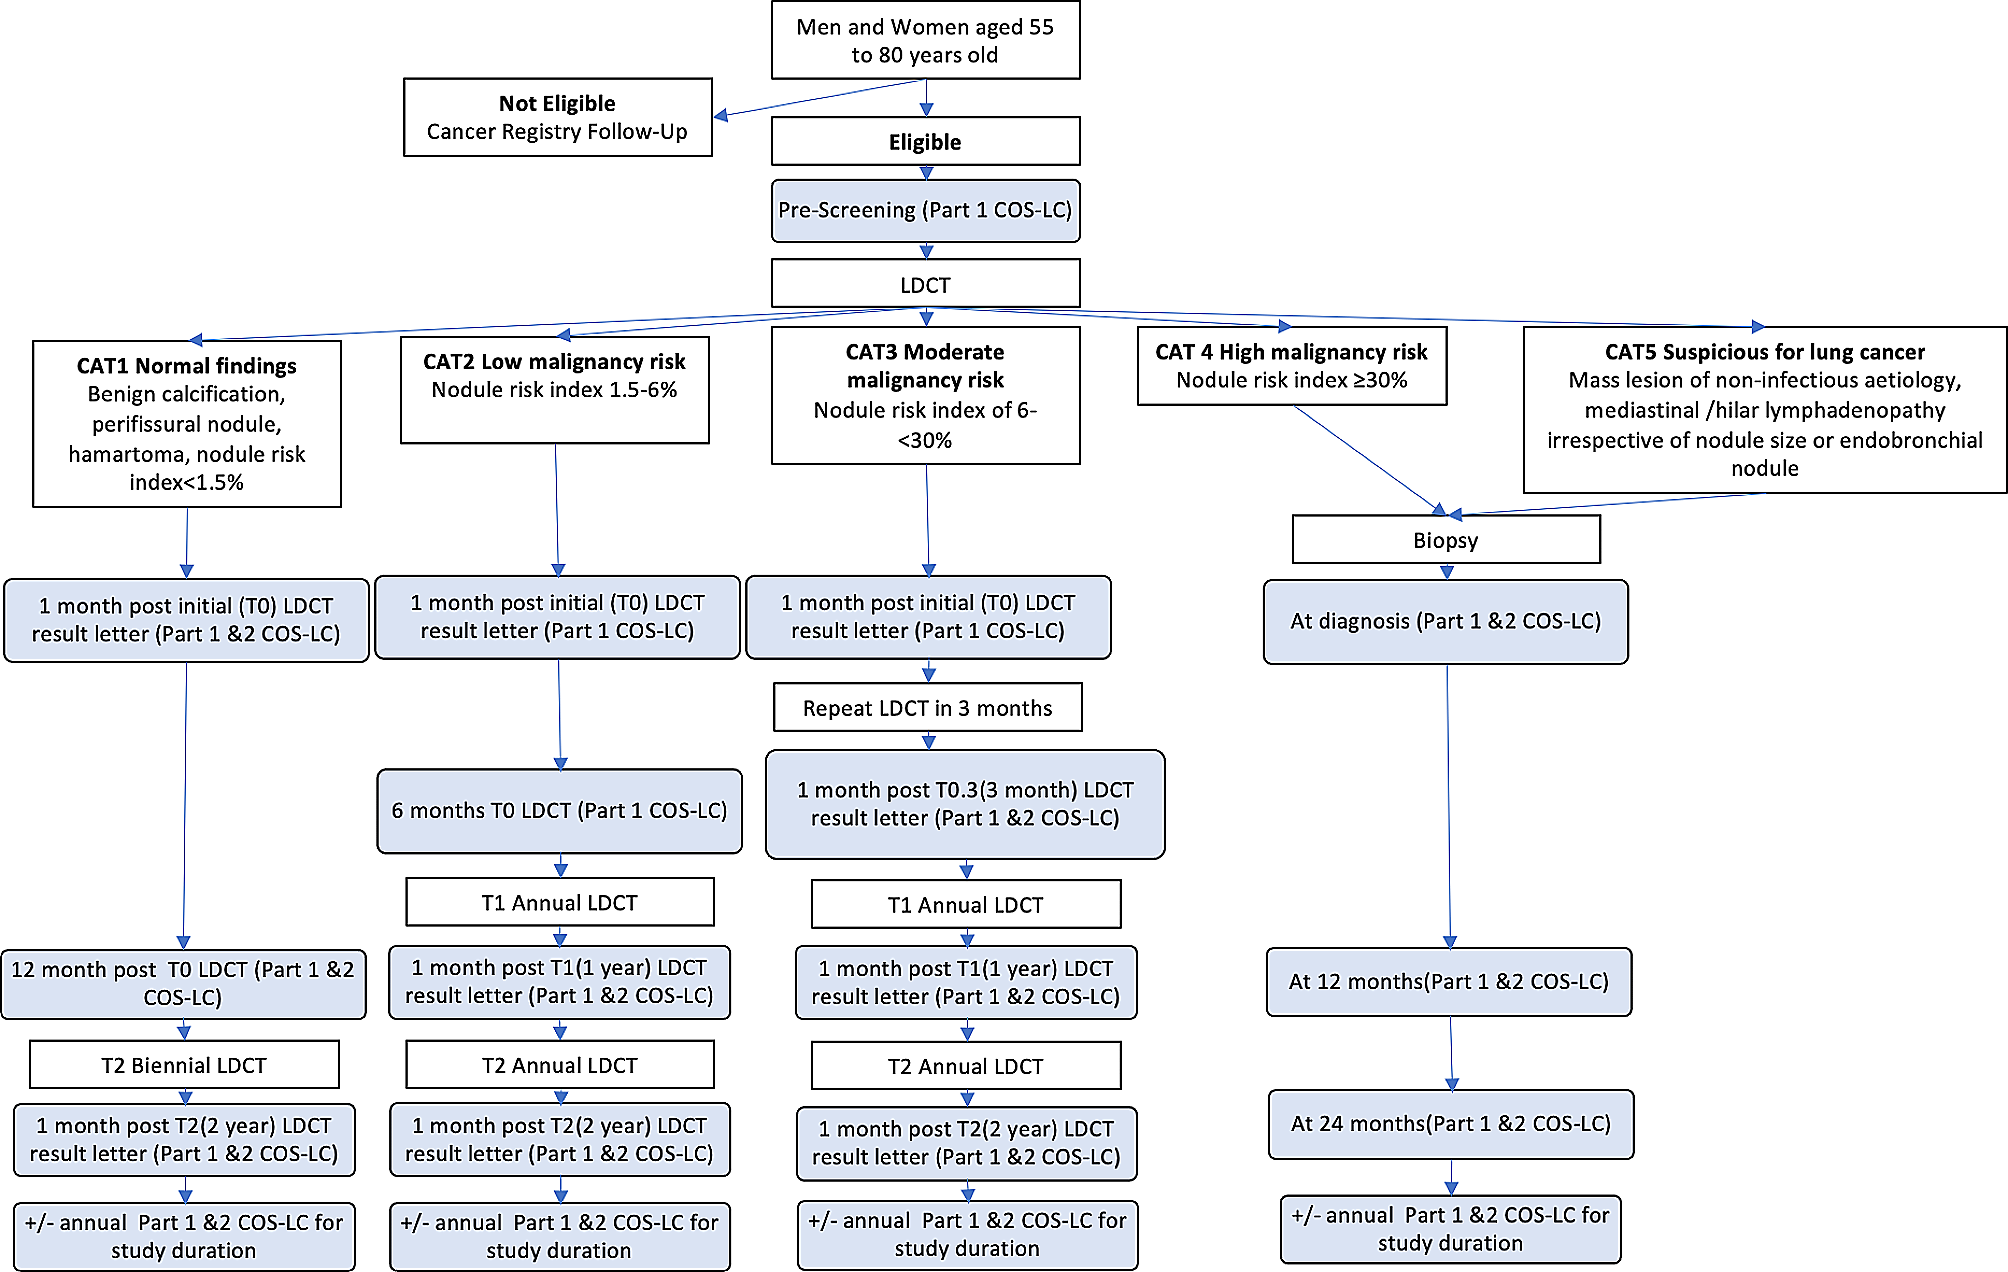 Validation of the psychosocial consequences of screening in lung cancer questionnaire in the international lung screen trial Australian cohort